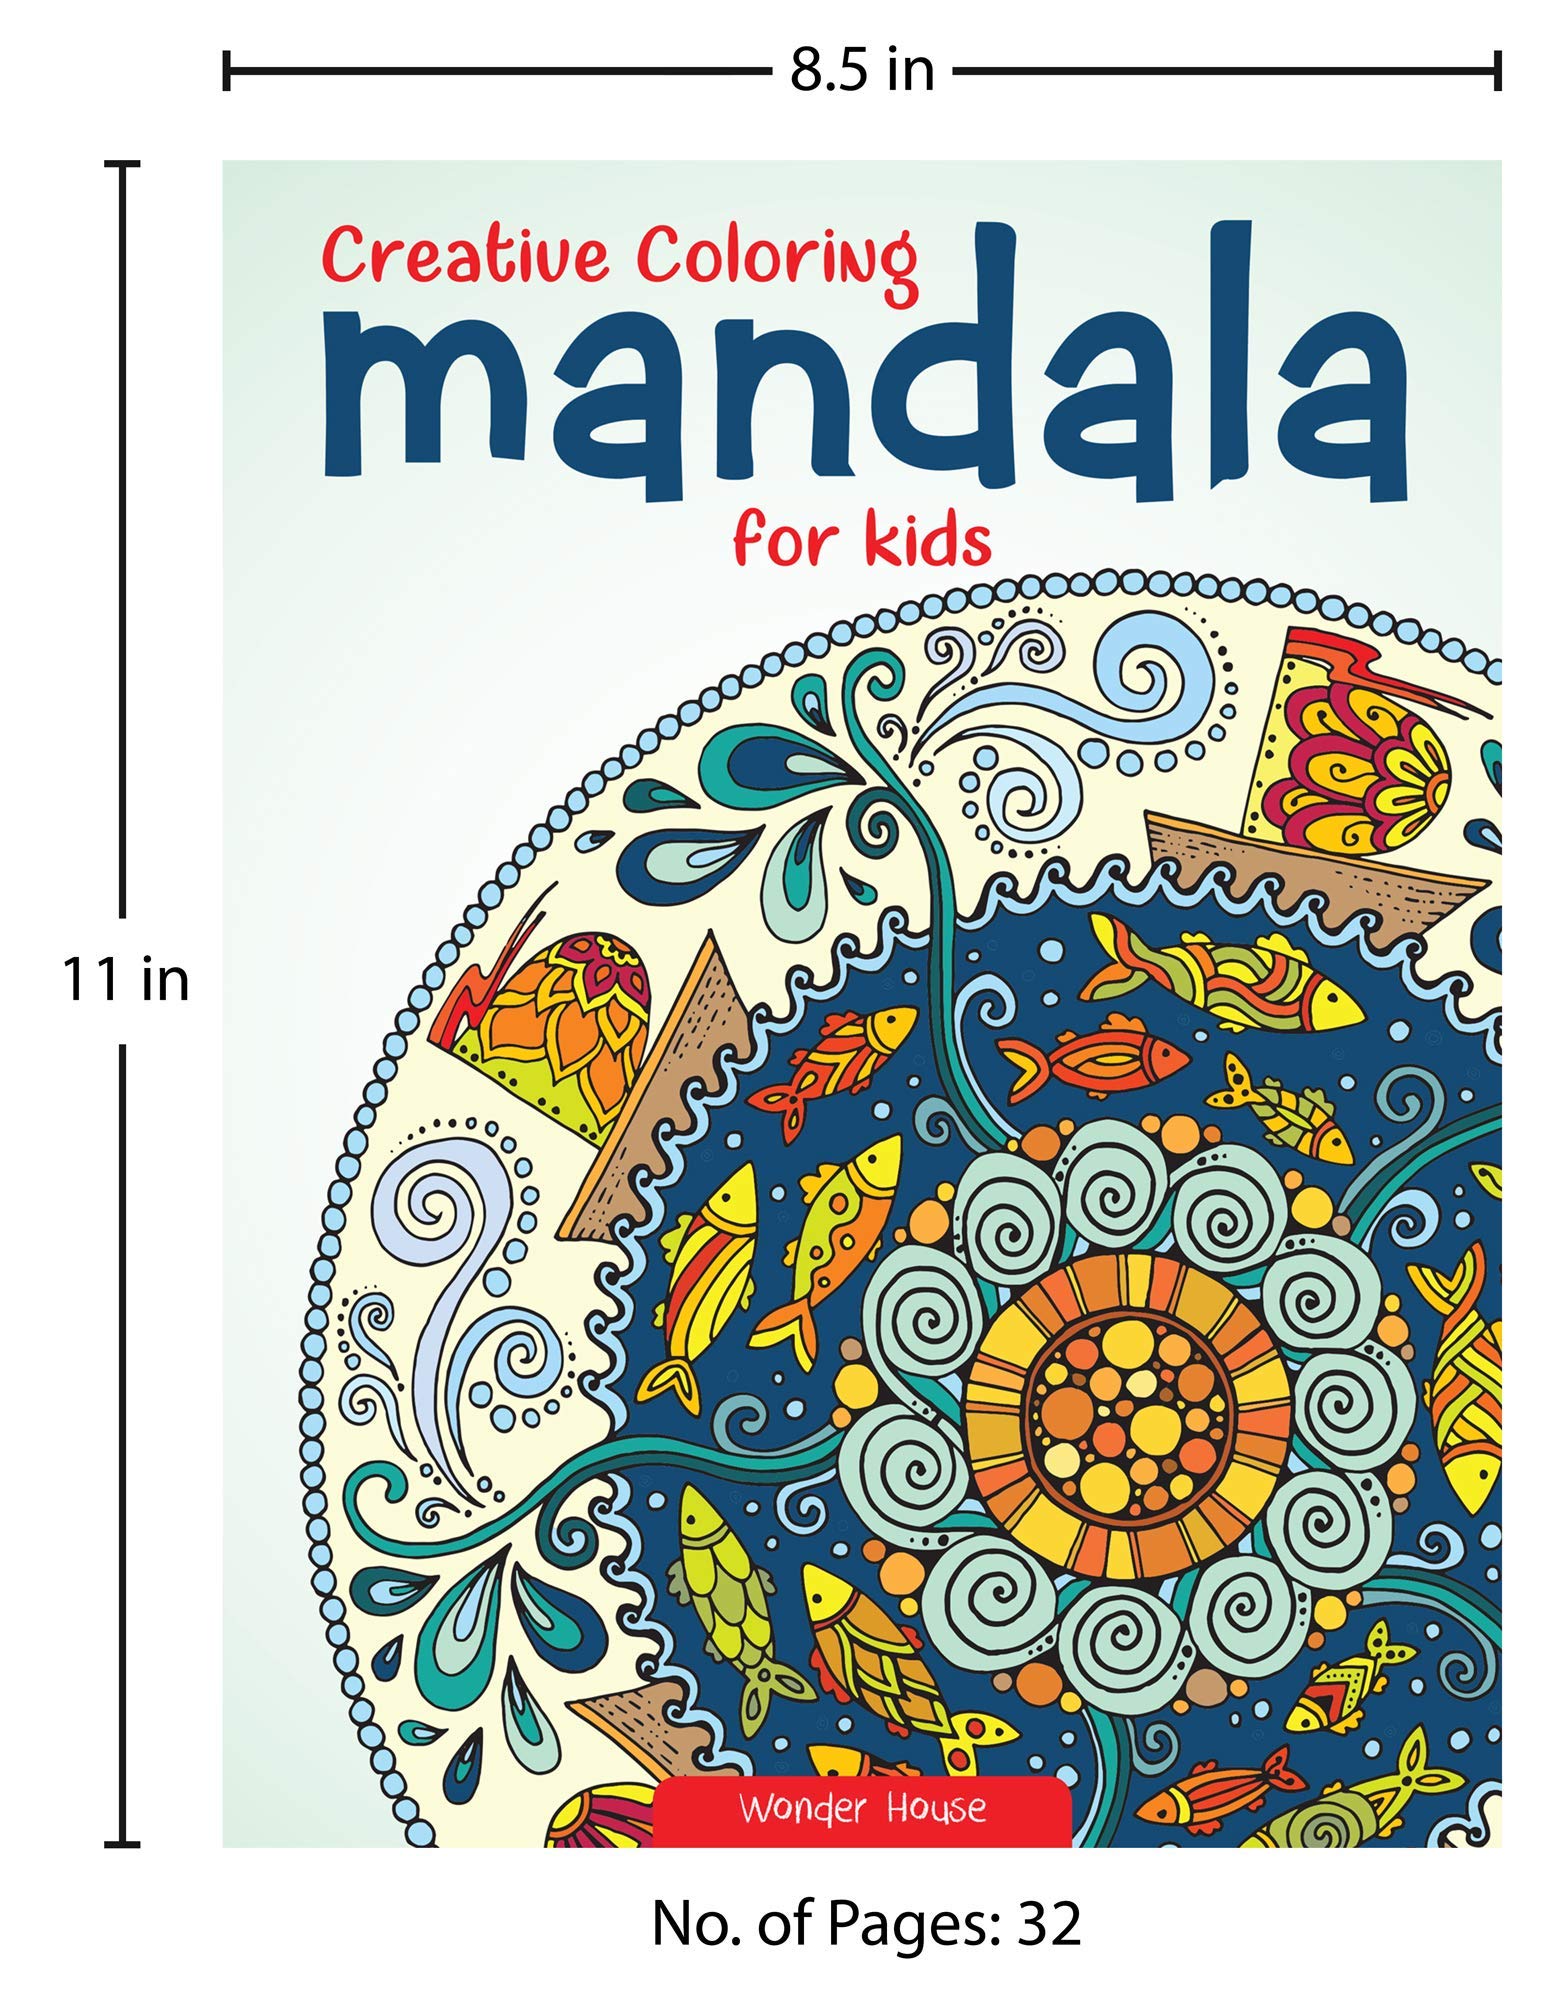 Creative Coloring Mandala For Kids (Coloring Book To Improve Concentration A)